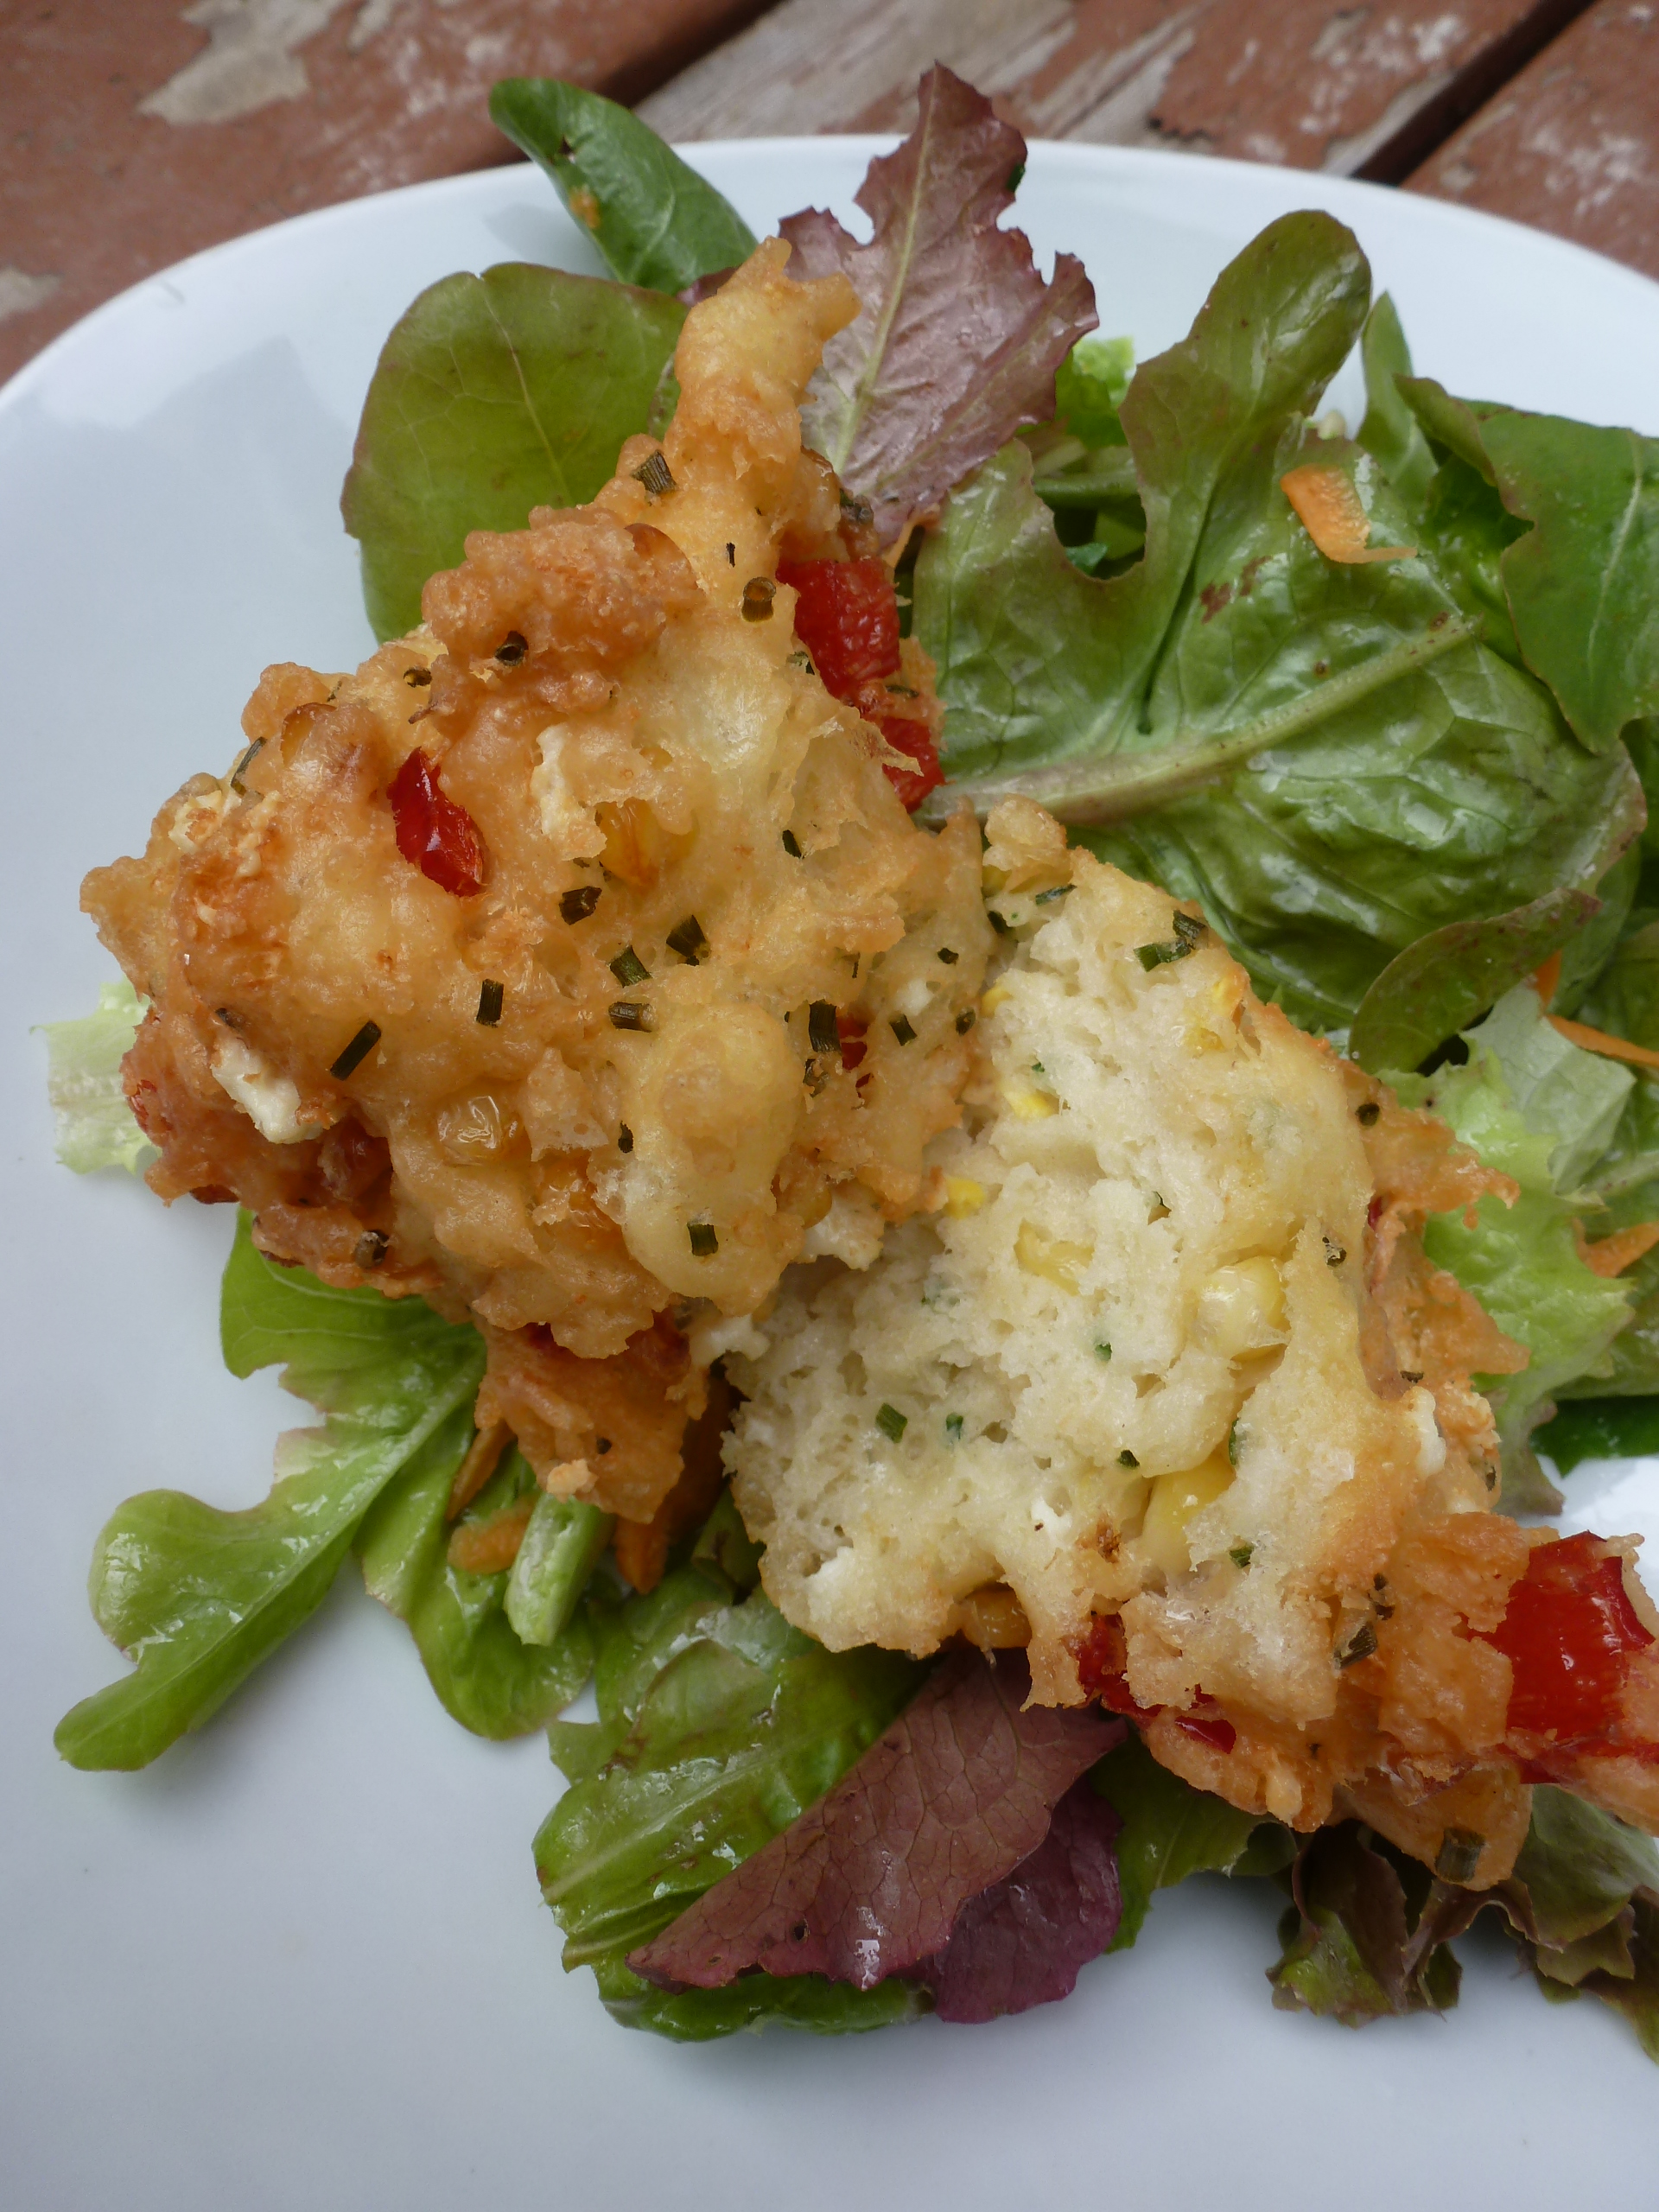 Corn fritters and salad